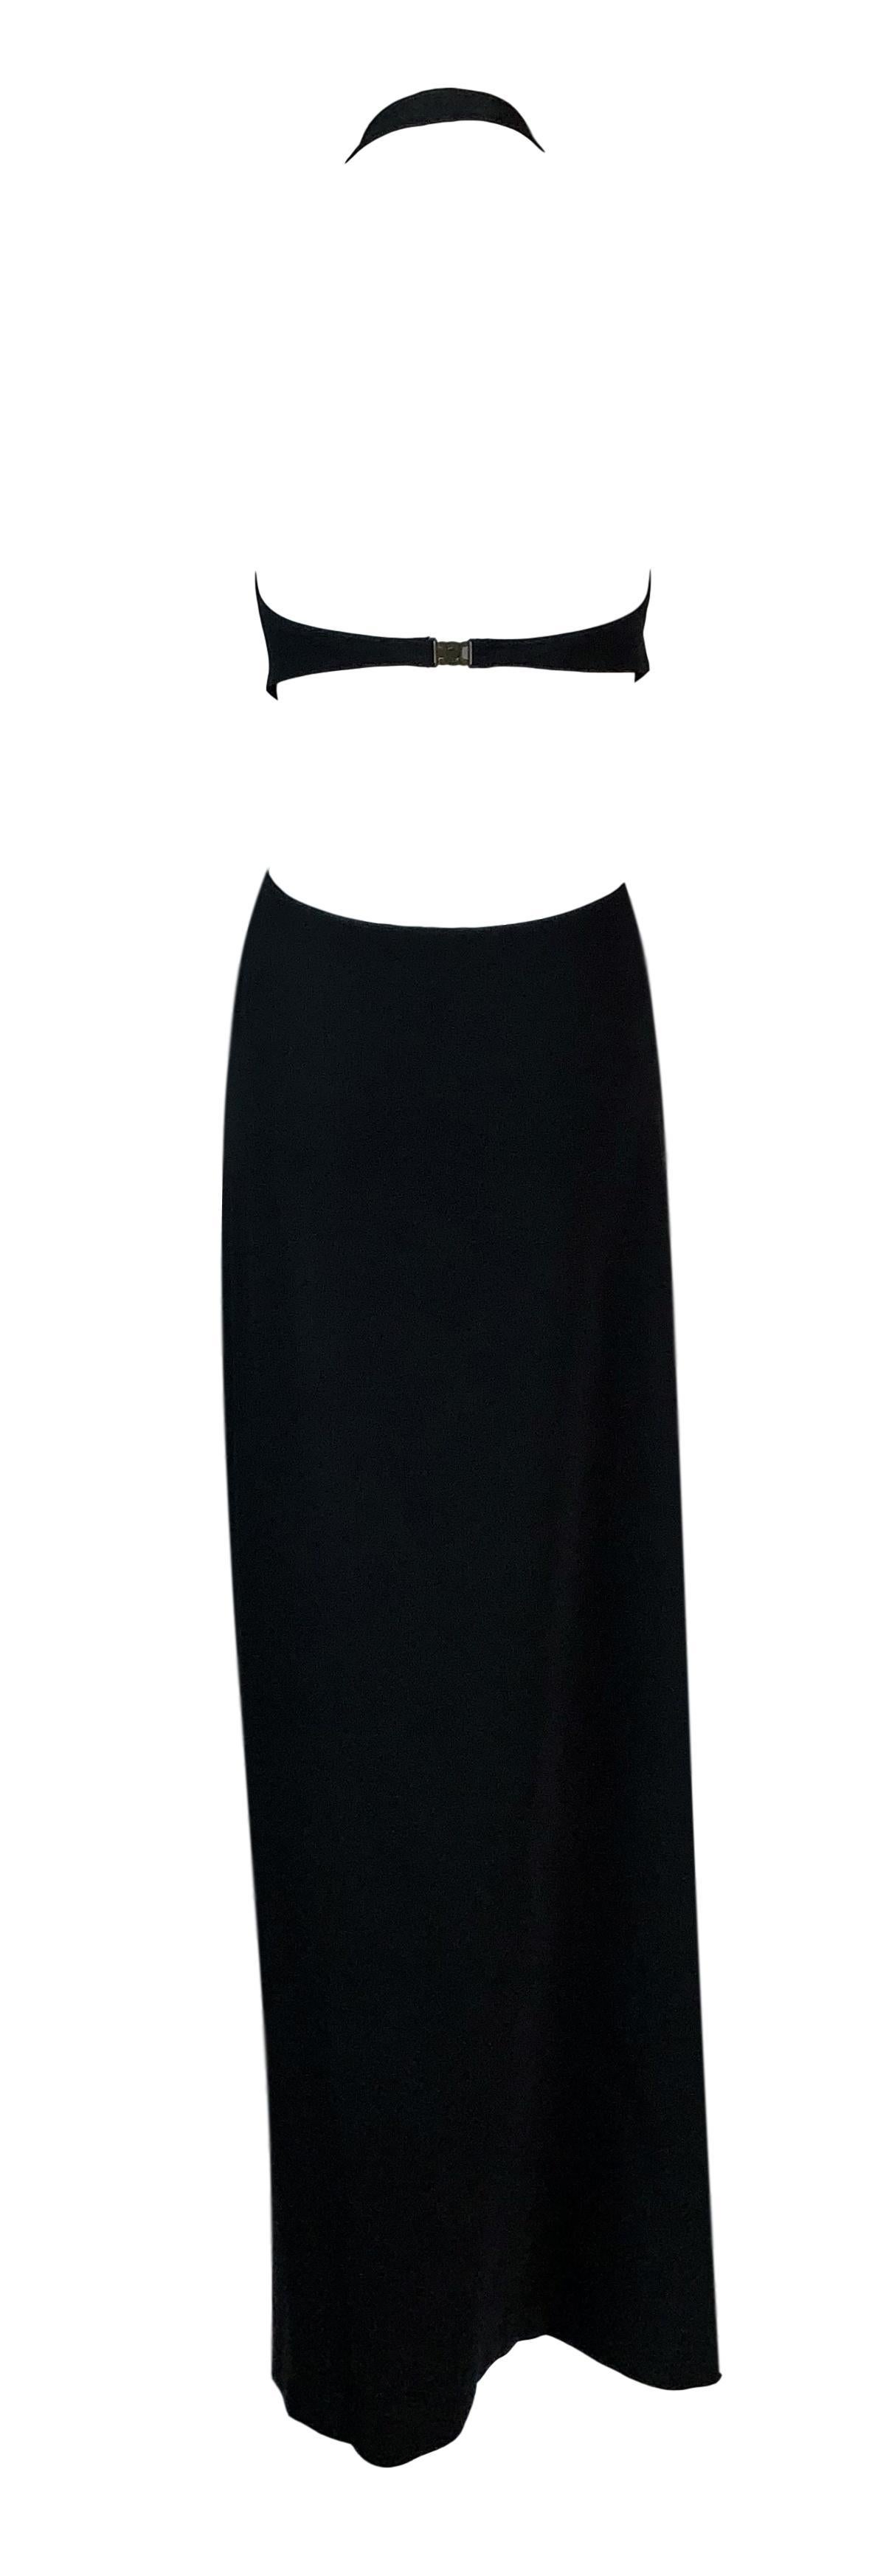 S/S 2004 Celine by Michael Kors Long Black Cut-Out Plunging Dress 40 In Good Condition In Yukon, OK